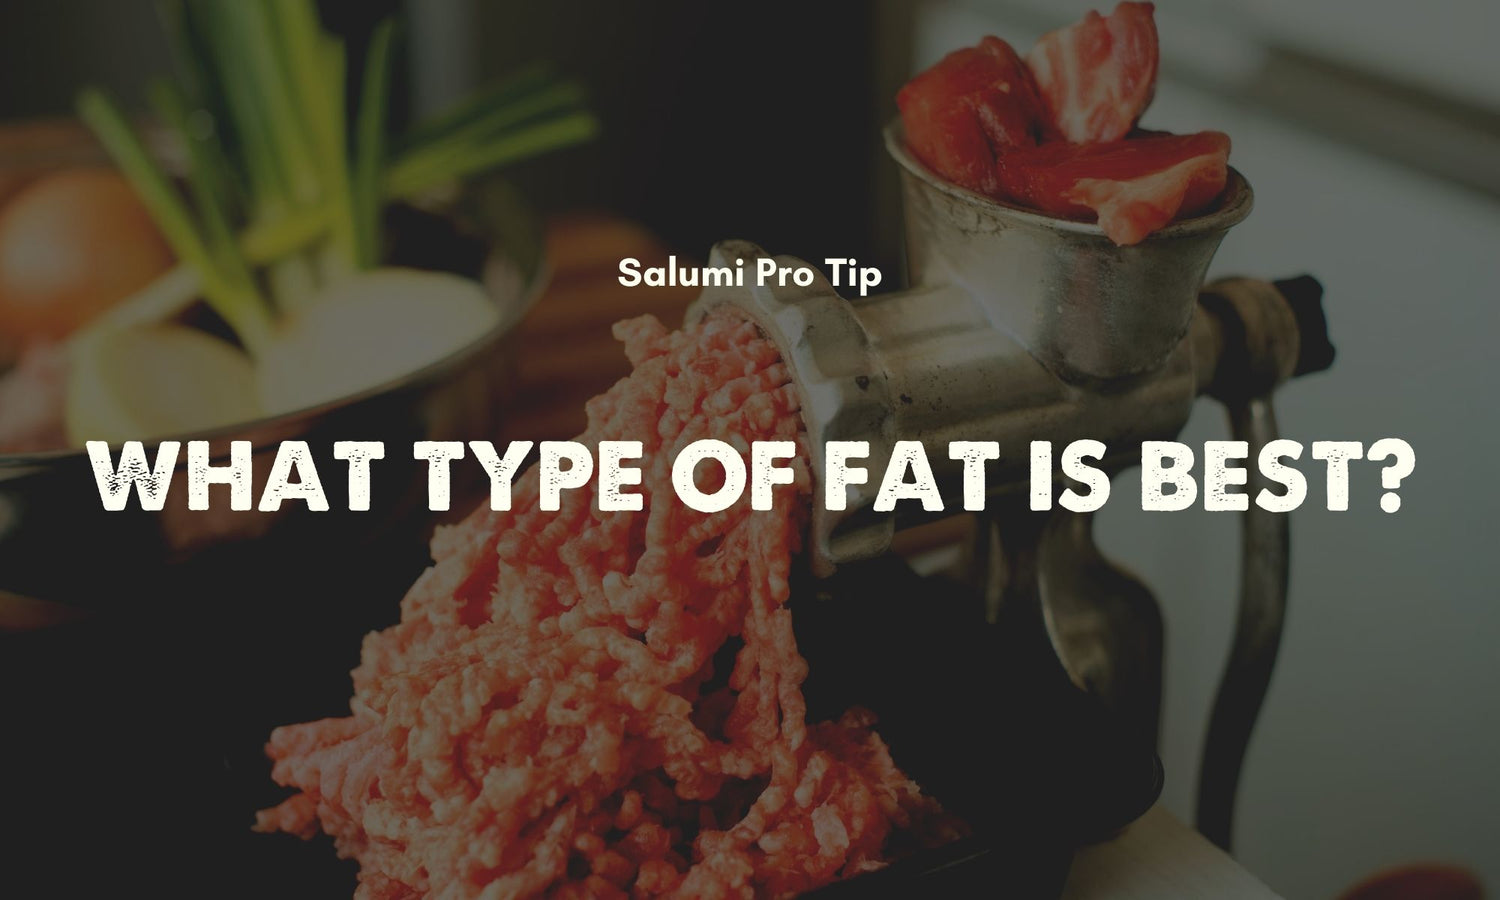 Salumi: What Type of Fat is Best?